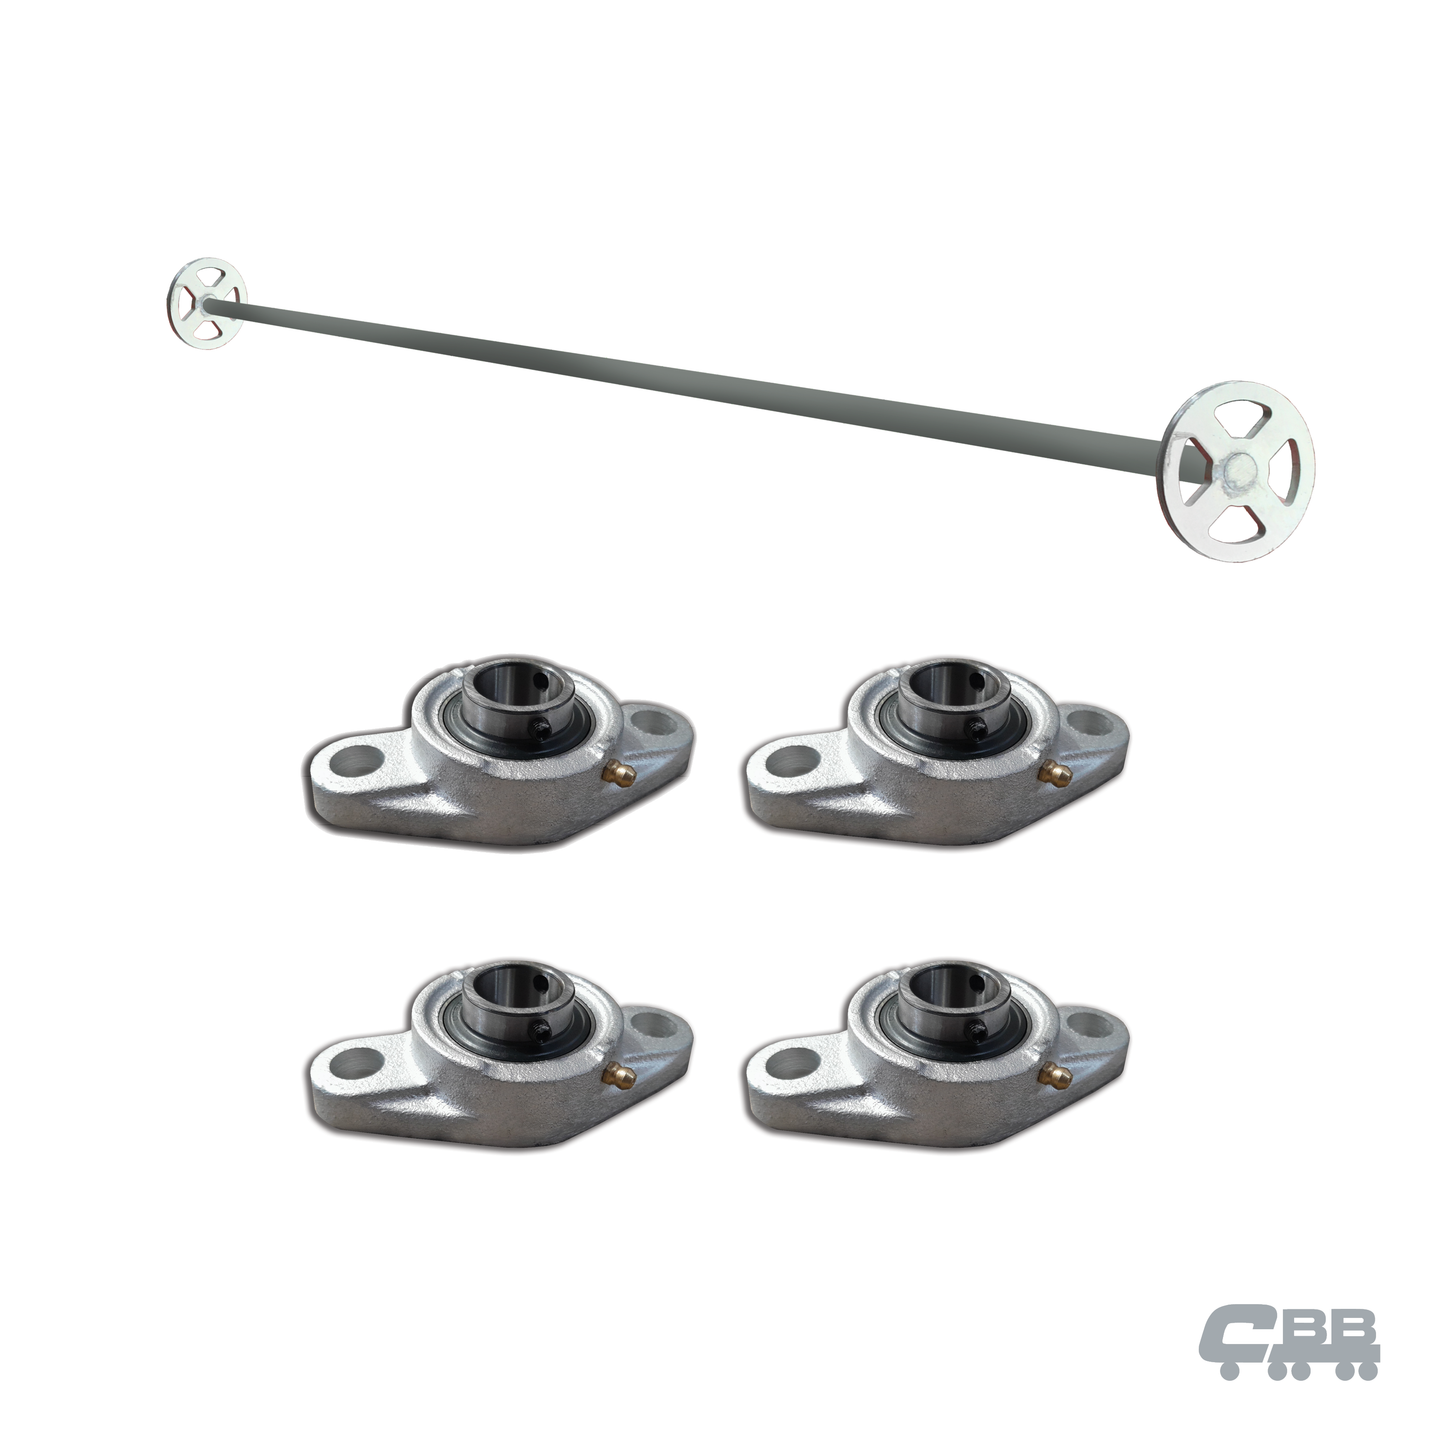 FRONT TARP SHAFT PULLEY ASSEMBLY - RAZOR SHAFT - COMPLETE KIT - INCLUDING BEARINGS - ALLOY